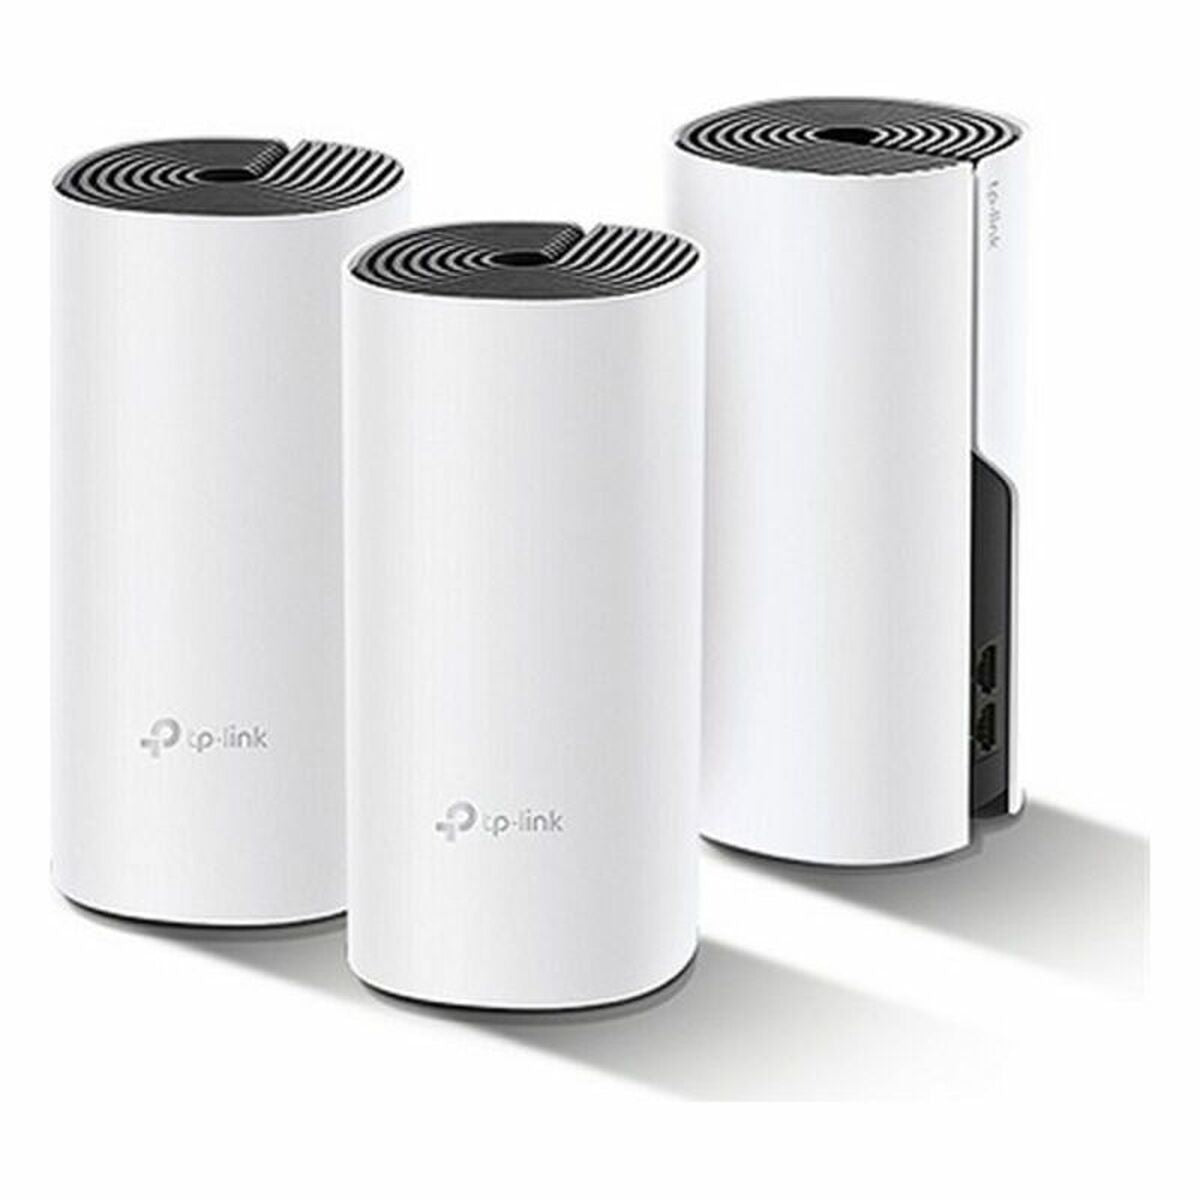 Access Point Repeater TP-Link Deco P9 5 GHz 300-867 Mbps Mesh (3 pcs), TP-Link, Computing, Network devices, access-point-repeater-tp-link-deco-p9-5-ghz-300-867-mbps-mesh-3-pcs, : Set of 3 Units, :300-867 Mbps, Brand_TP-Link, category-reference-2609, category-reference-2803, category-reference-2820, category-reference-t-19685, category-reference-t-19914, Condition_NEW, networks/wiring, Price_200 - 300, Teleworking, RiotNook